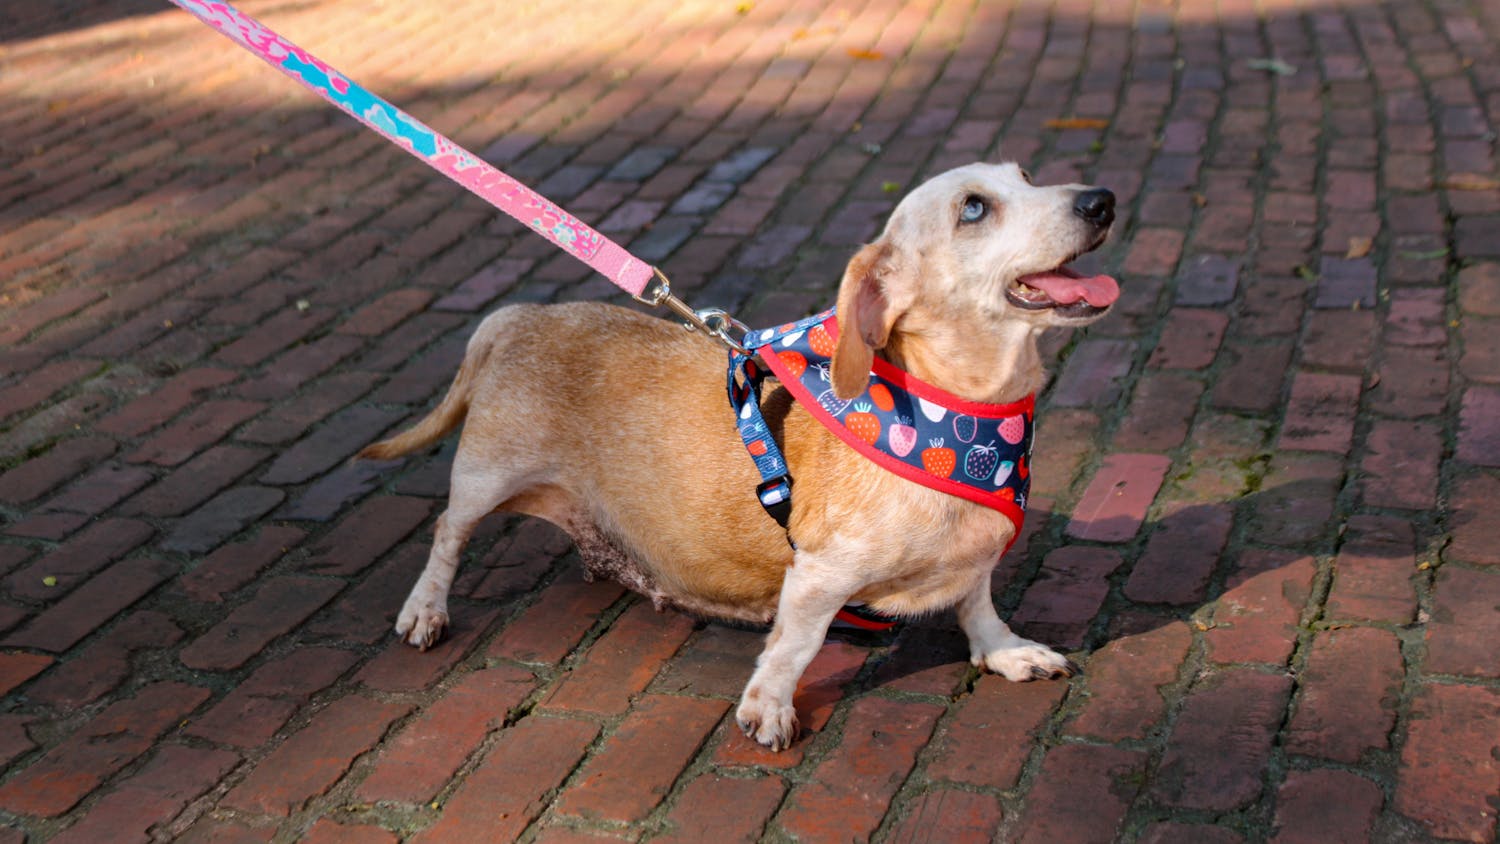 A tan and white Dachshund stretches on a brick pathway in the USC Horseshoe on Sept. 17, 2022. The Columbia dog-walking group gathered with their furry friends for a walk through USC's Horseshoe on Saturday morning.